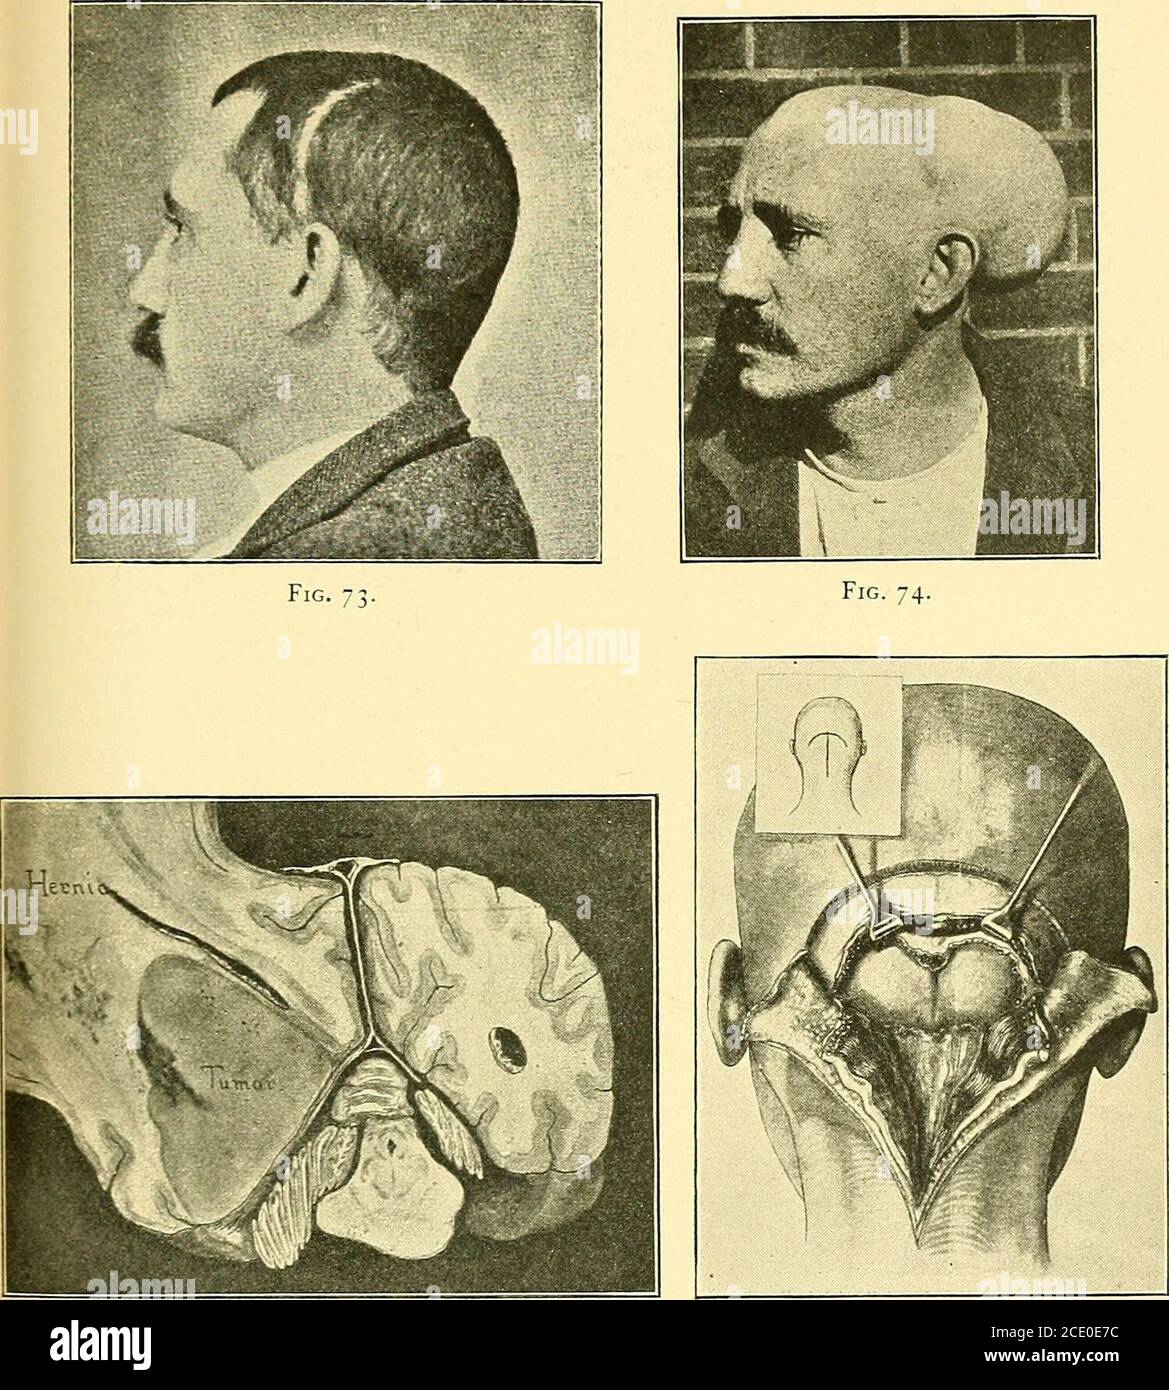 . Some points in the surgery of the brain and its membranes . n. No patient should be allowedto become blind from optic neuritis. A woman, aged forty-one years, was admitted to theNational Hospital, under Dr. Buzzard, with symptomspointing to tumour pressing on the internal capsule :hemianassthesia, hemiplegia, severe headache, and failingsight from optic neuritis. She became comatose aftera paroxysm of pain. I opened the skull and dura.Consciousness returned, and the headache, optic neuritis,and vomiting were completely relieved. There waseven, a month later, some return of power and sensatio Stock Photo